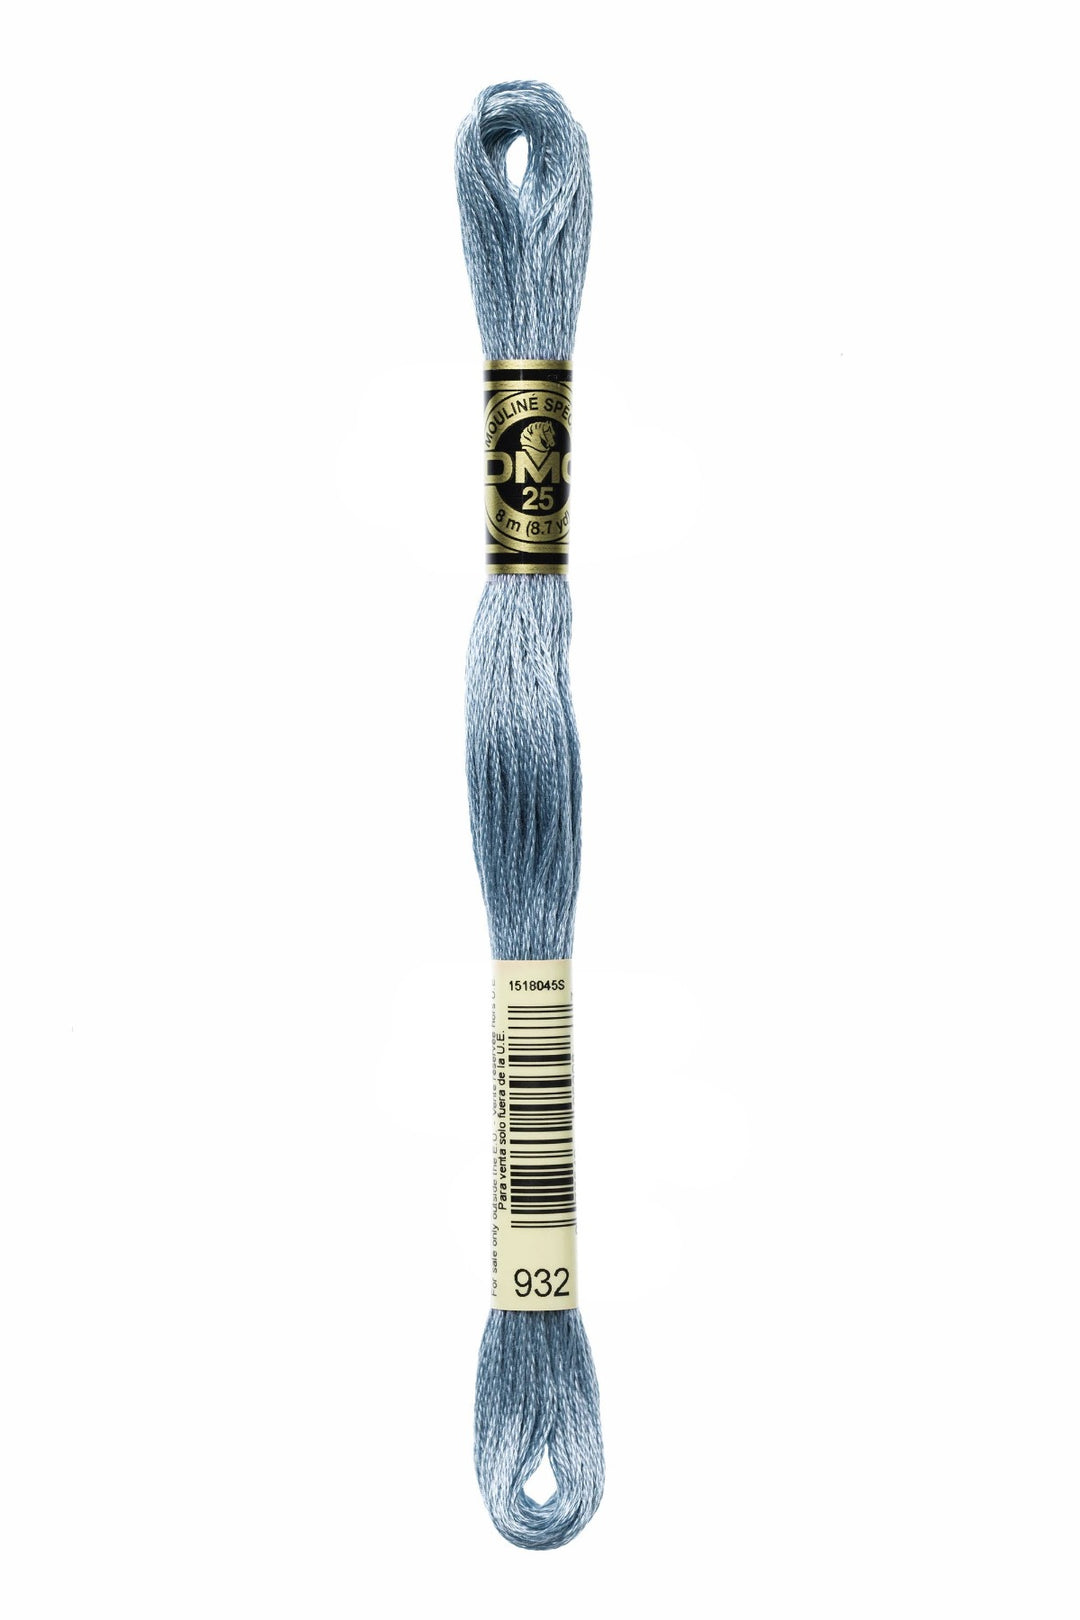 6-Strand Embroidery Floss 932 Lt Antique Blue